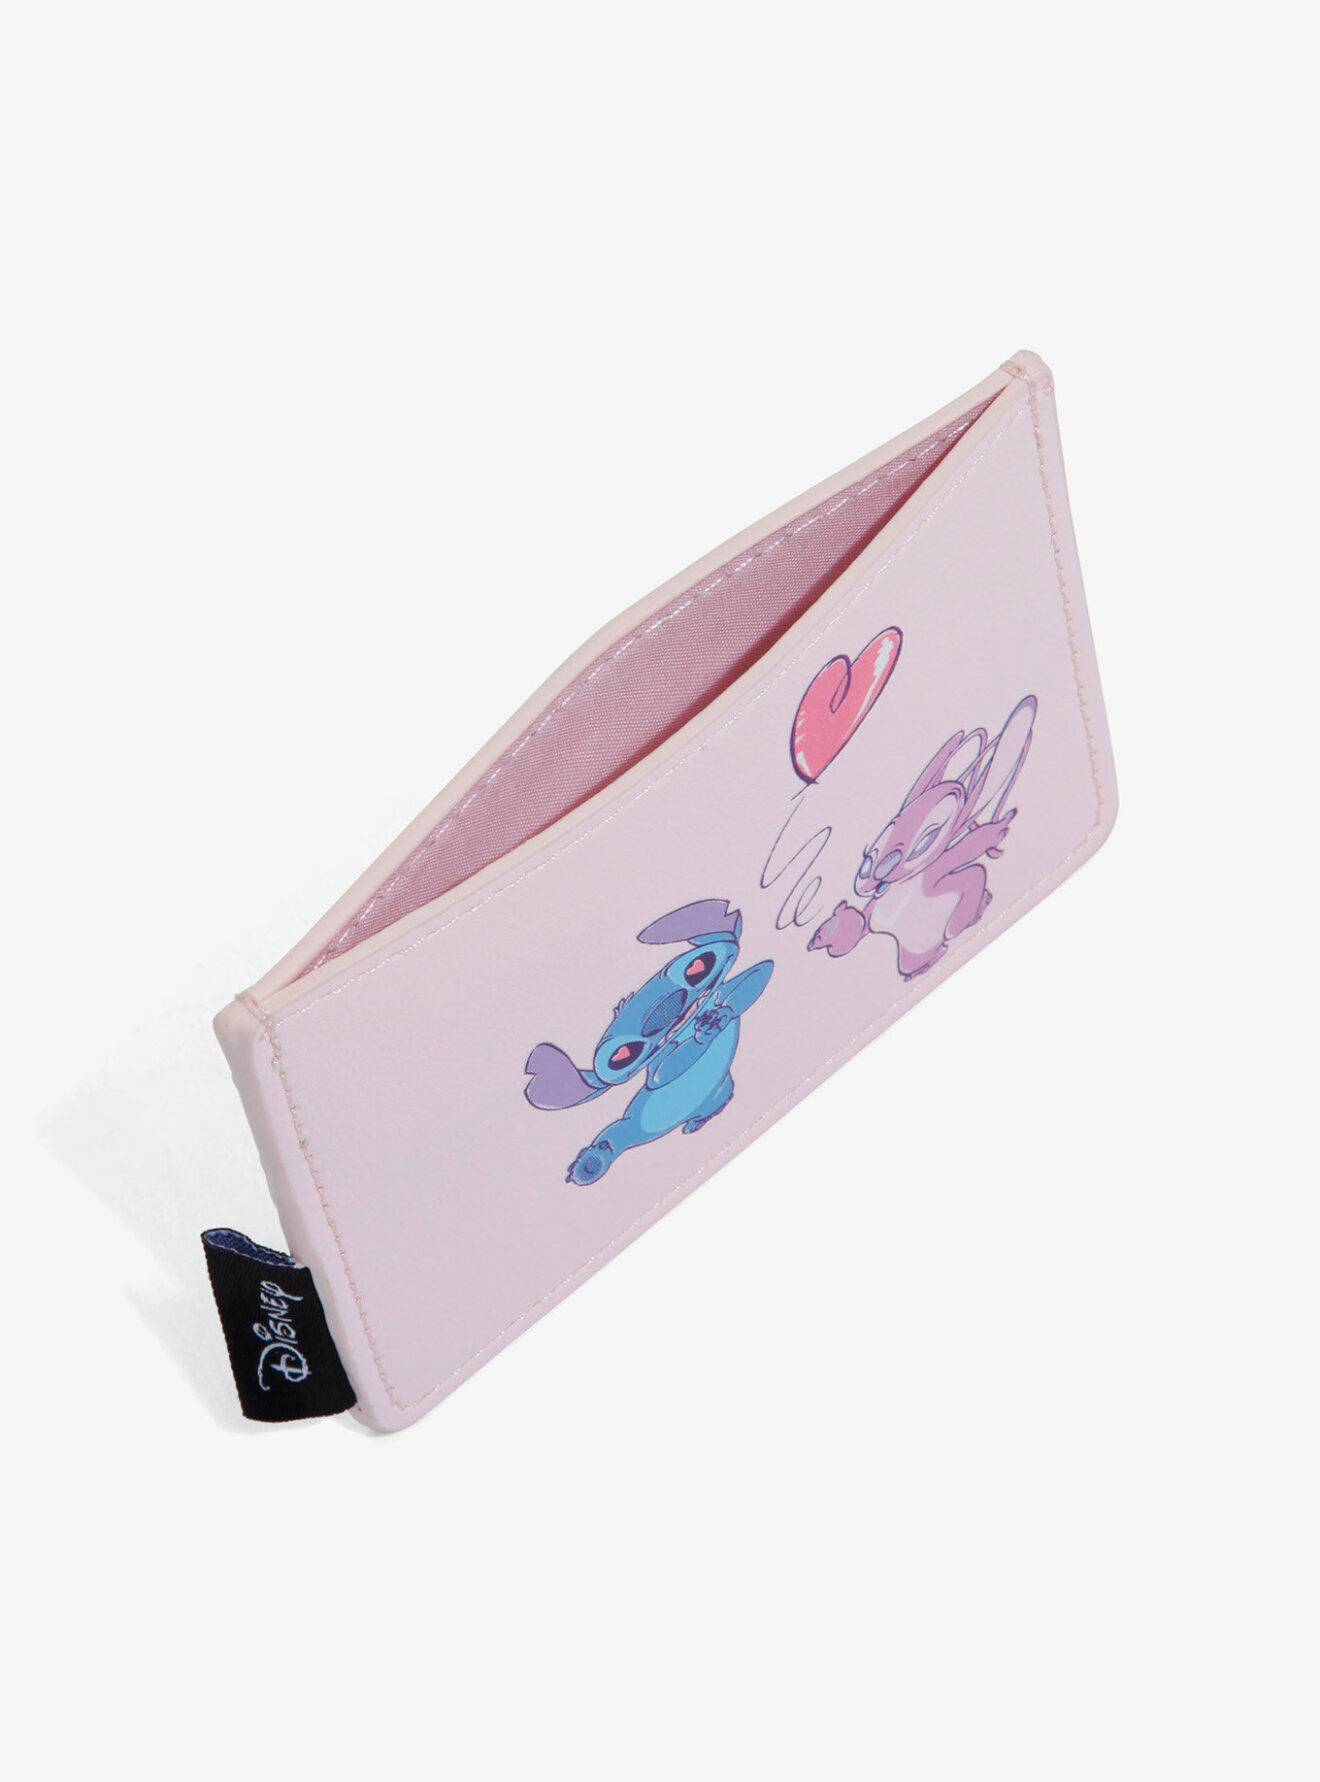 New Stitch and Angel Backpack and Cardholder by Loungefly!